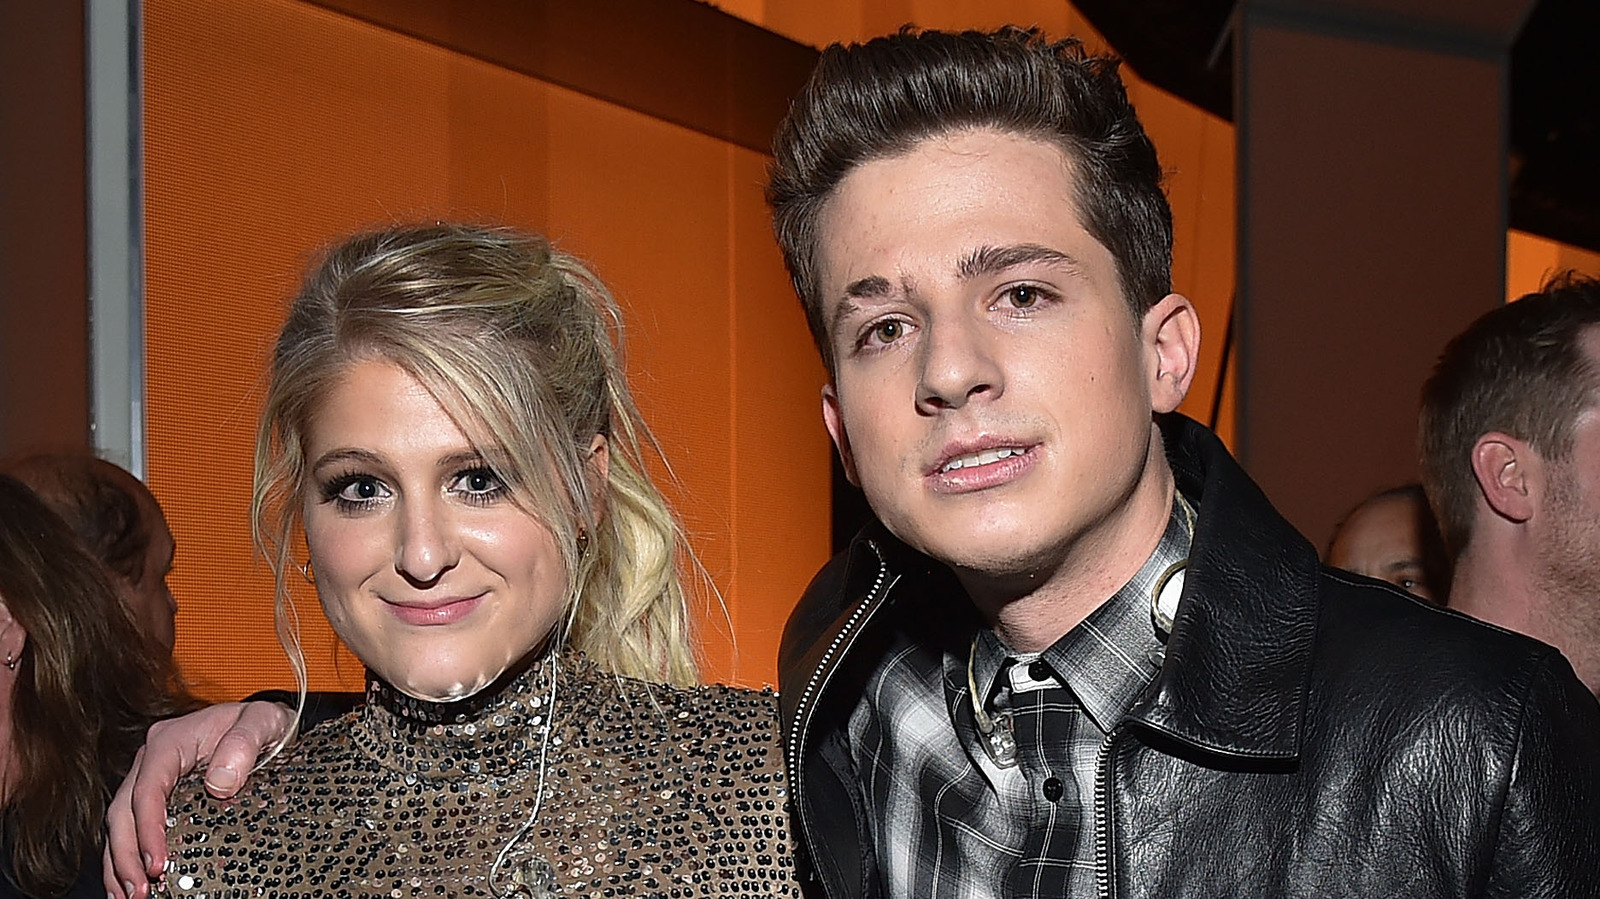 Meghan Trainor Is 'All About' the AMAs 2014!, 2014 American Music Awards, Meghan  Trainor